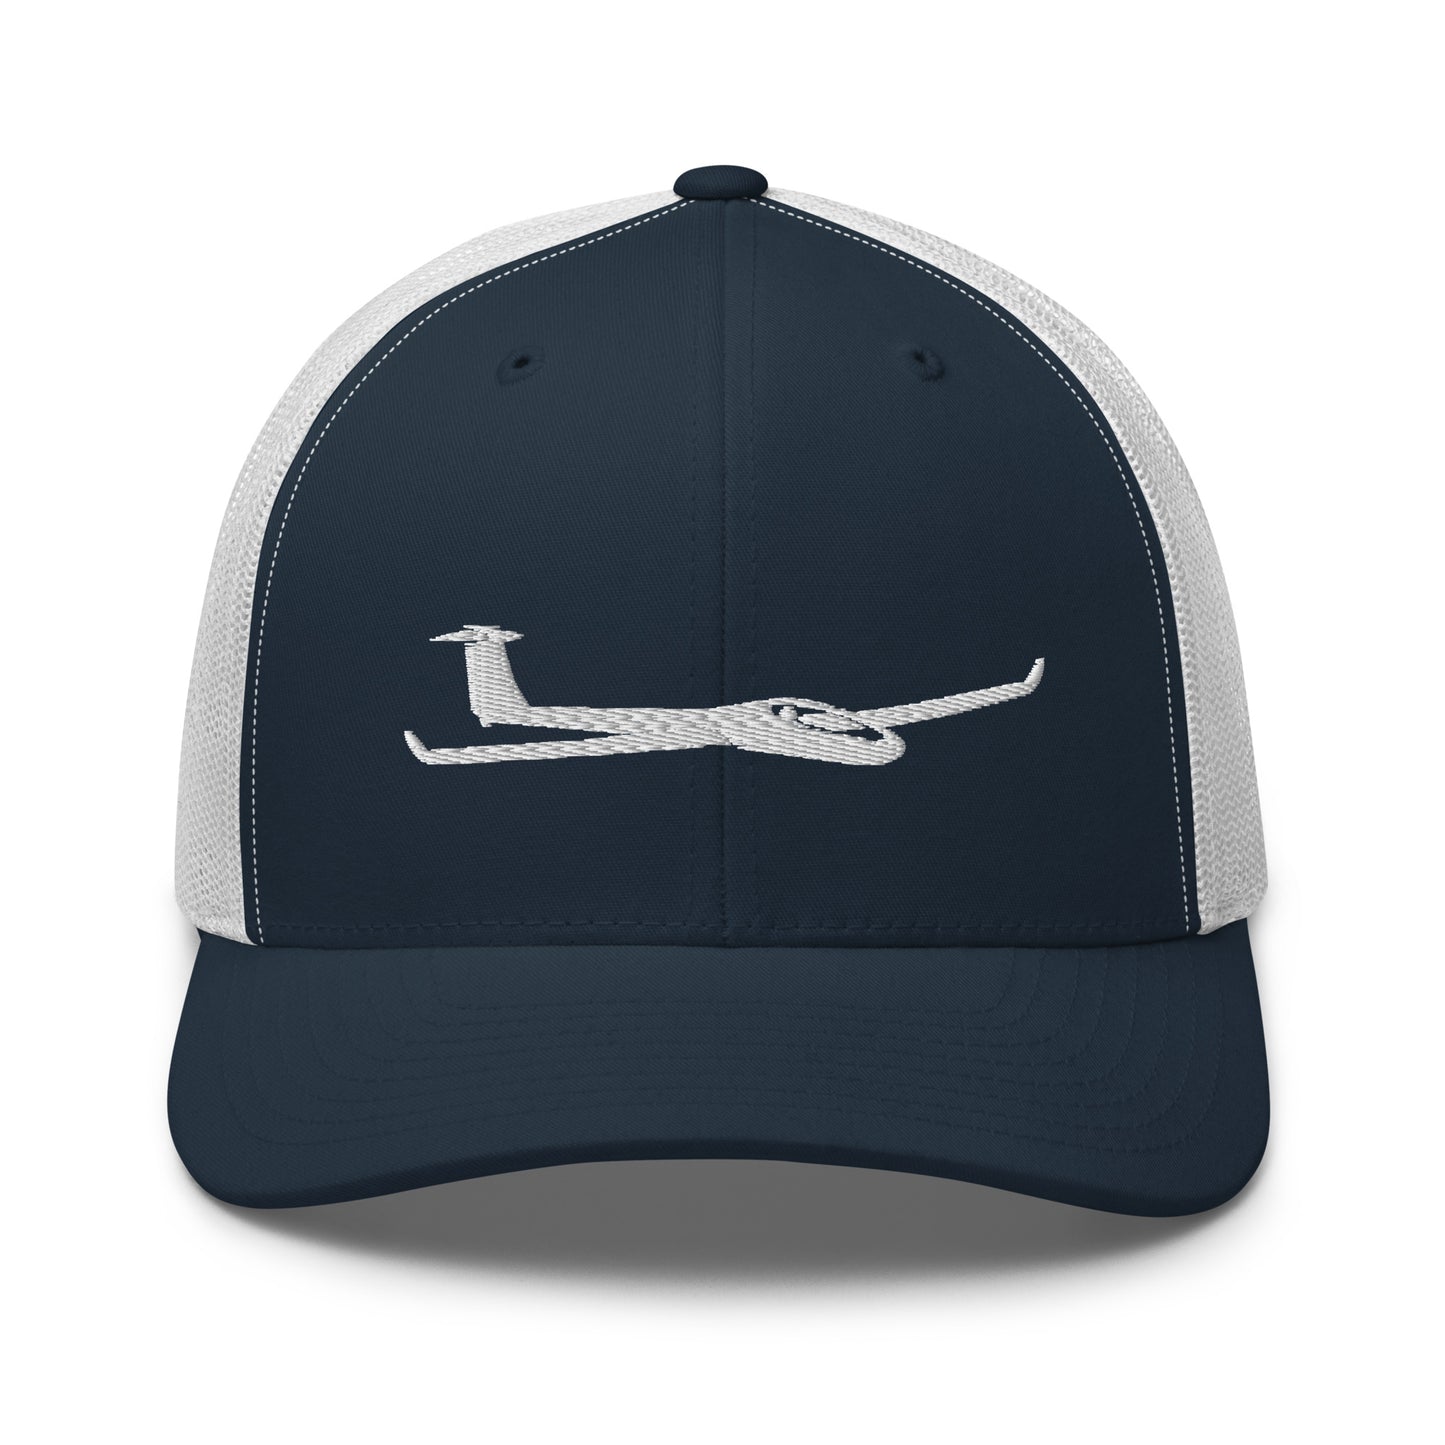 Glider Trucker Hat.  A blue and white Yupoong 6606 hat with a white glider embroidered on the front panel.